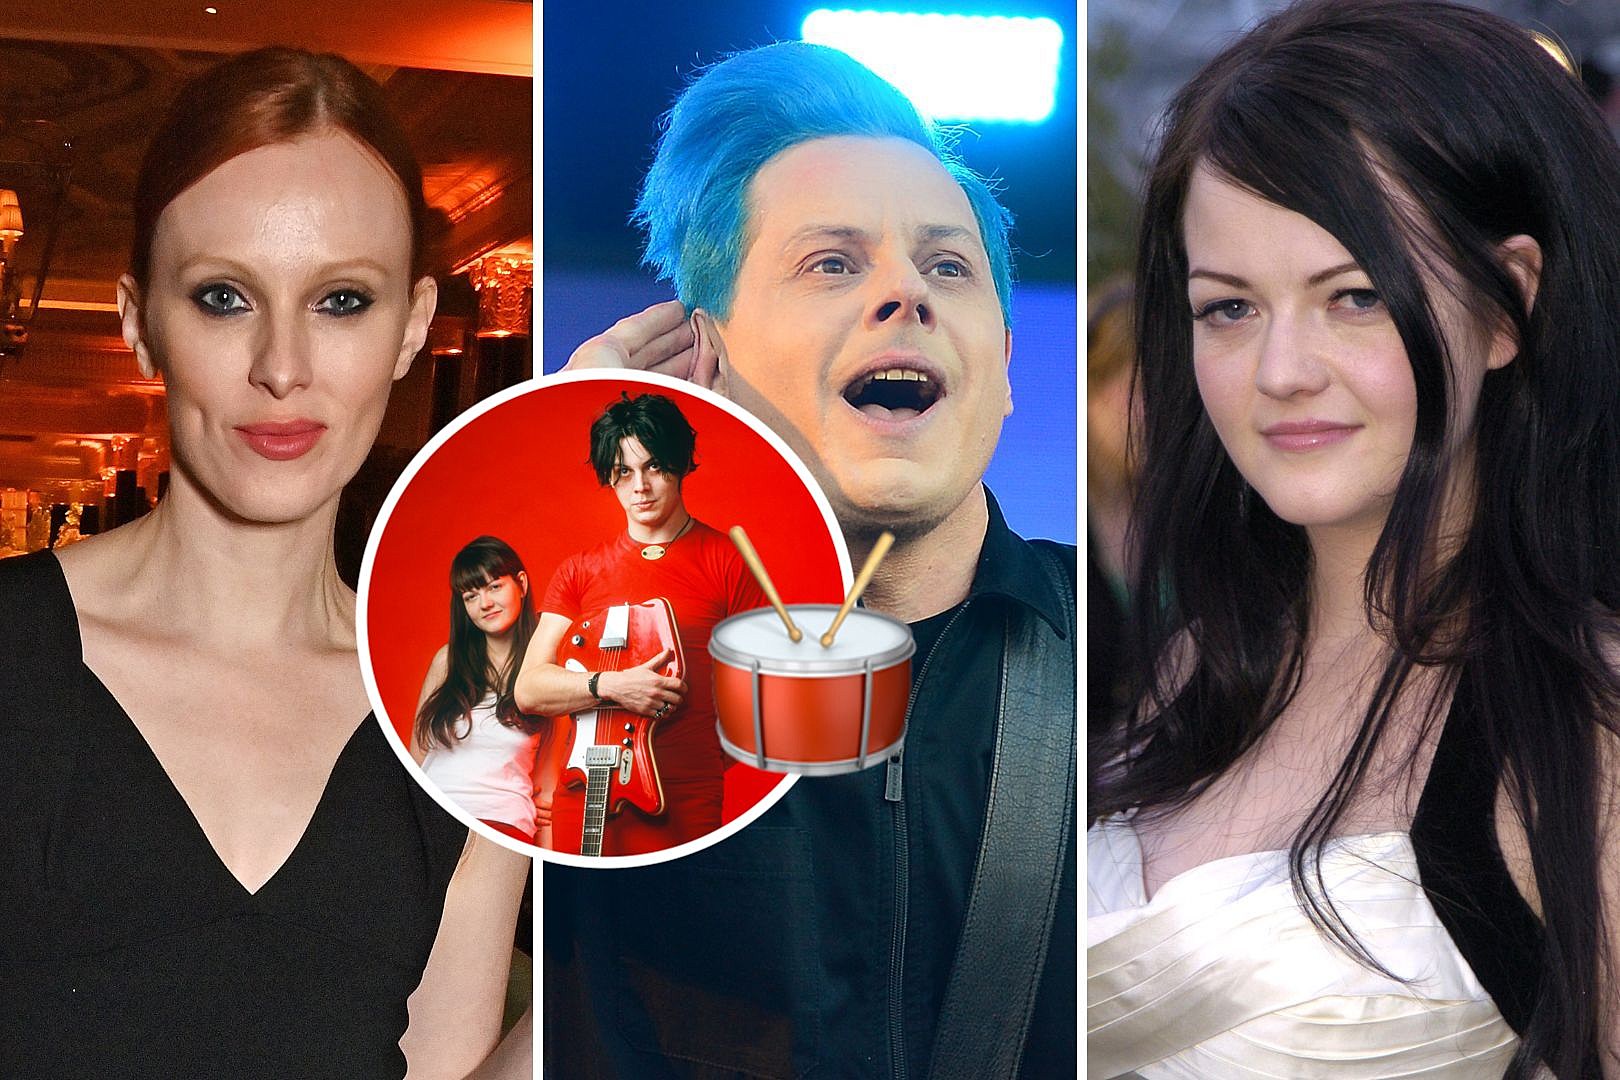 Jack White's Blue Hair: A Look at His Most Memorable Hairstyles - wide 2